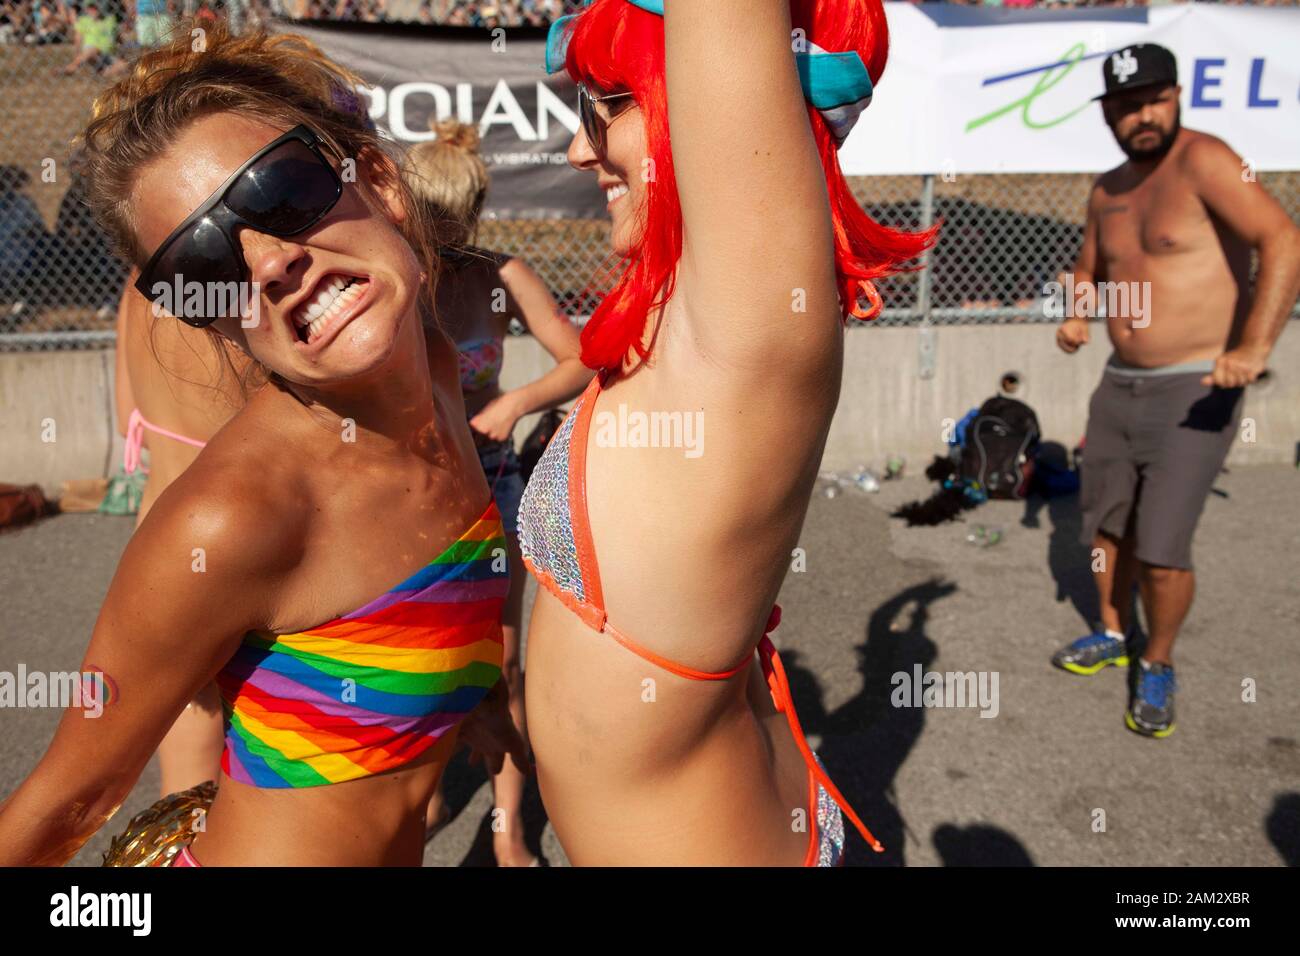 Friends dancing and chest bumping  in sun at festival, Vancouver Pride Festival 2014, Vancouver, Canada Stock Photo